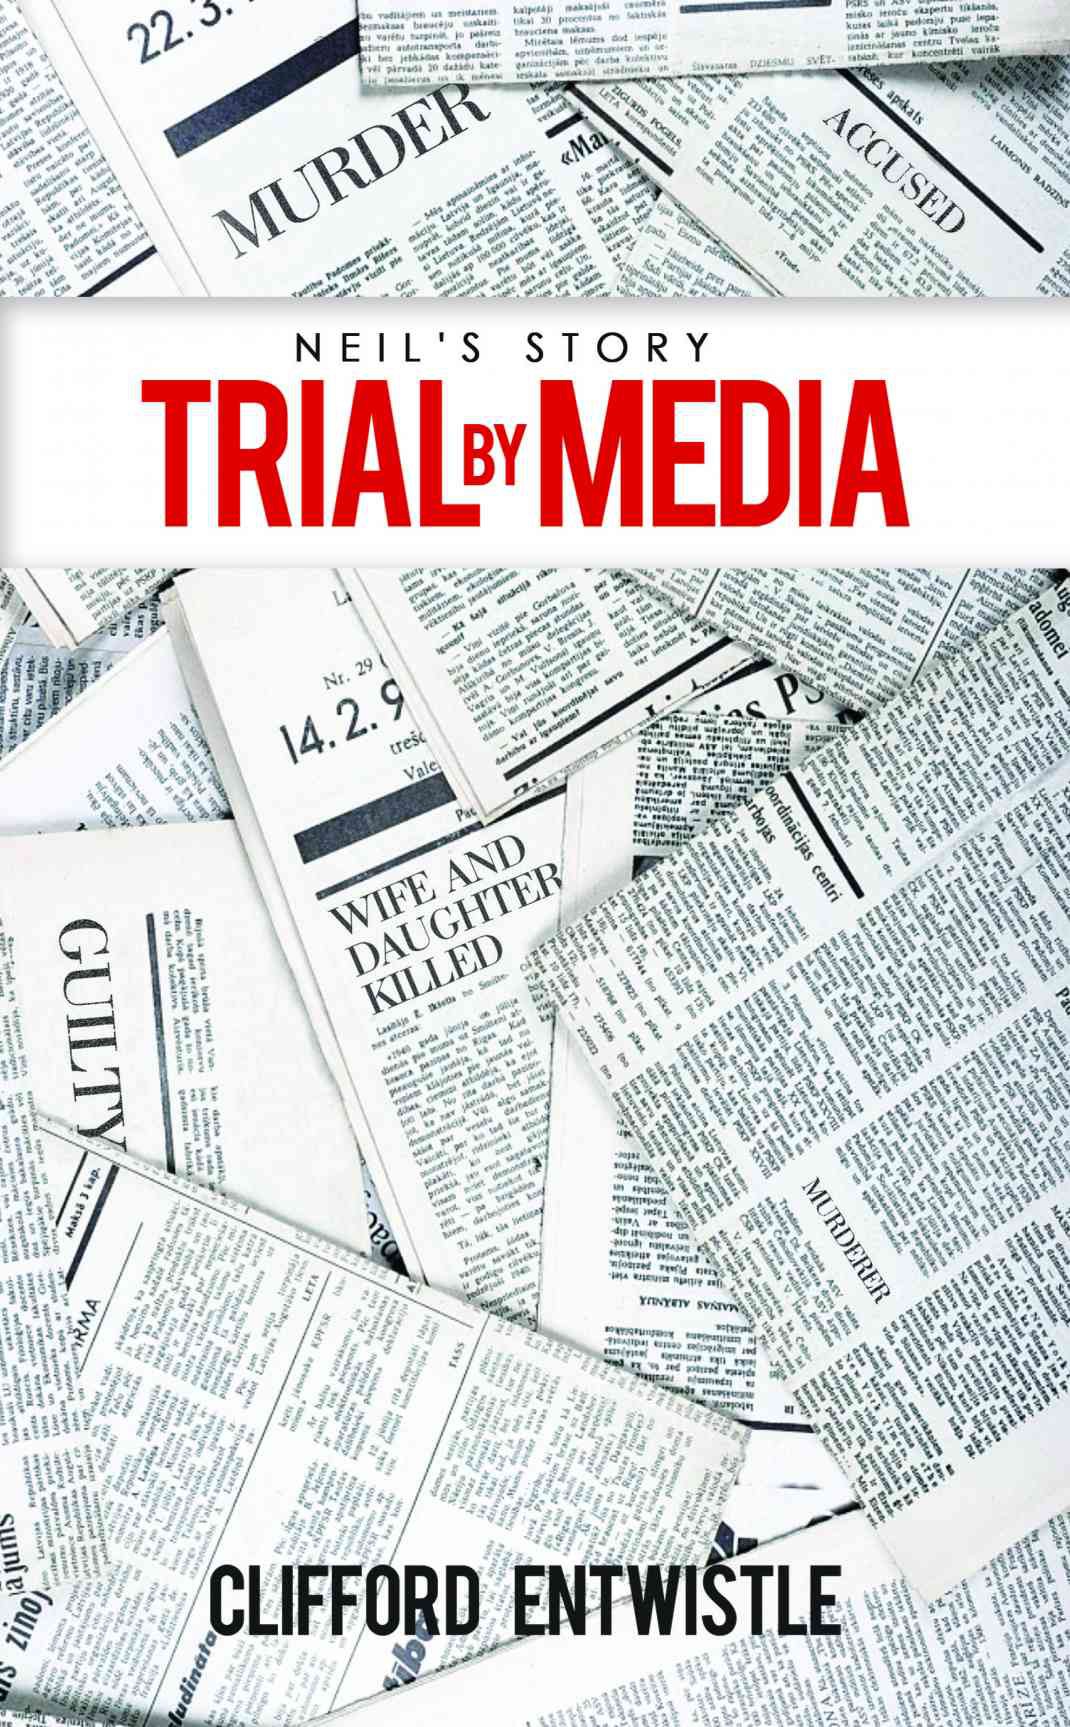 An Online Newspaper Featured Clifford Entwistle’s Book ‘Neil's Story: Trial by Media’